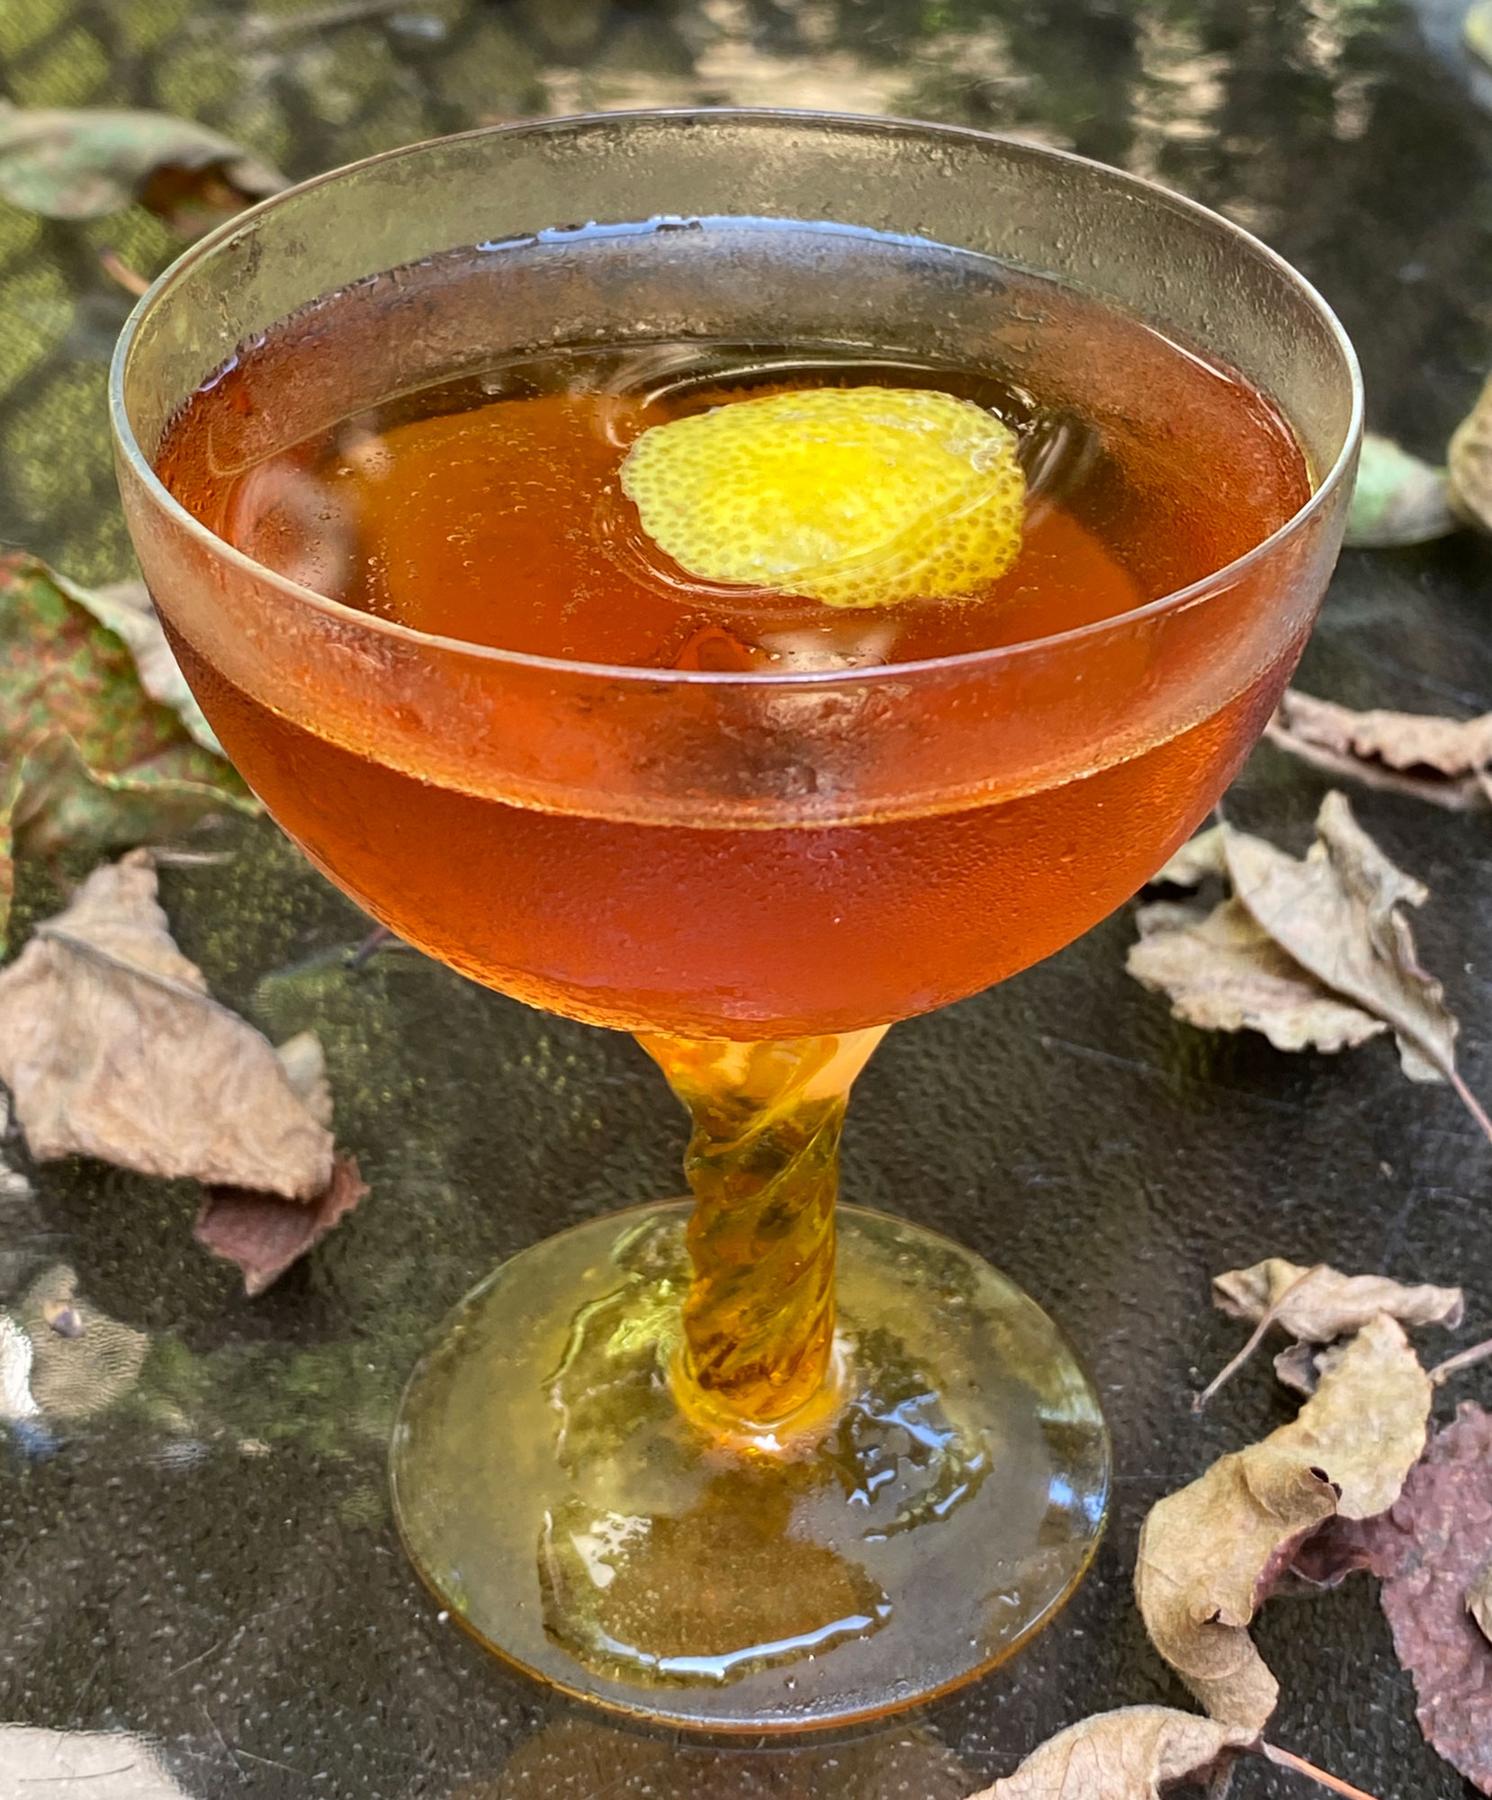 An example of the Harvest Cocktail, the mixed drink (drink) featuring apple brandy, Cardamaro Vino Amaro, Angostura bitters, and lemon twist; photo by Martin Doudoroff